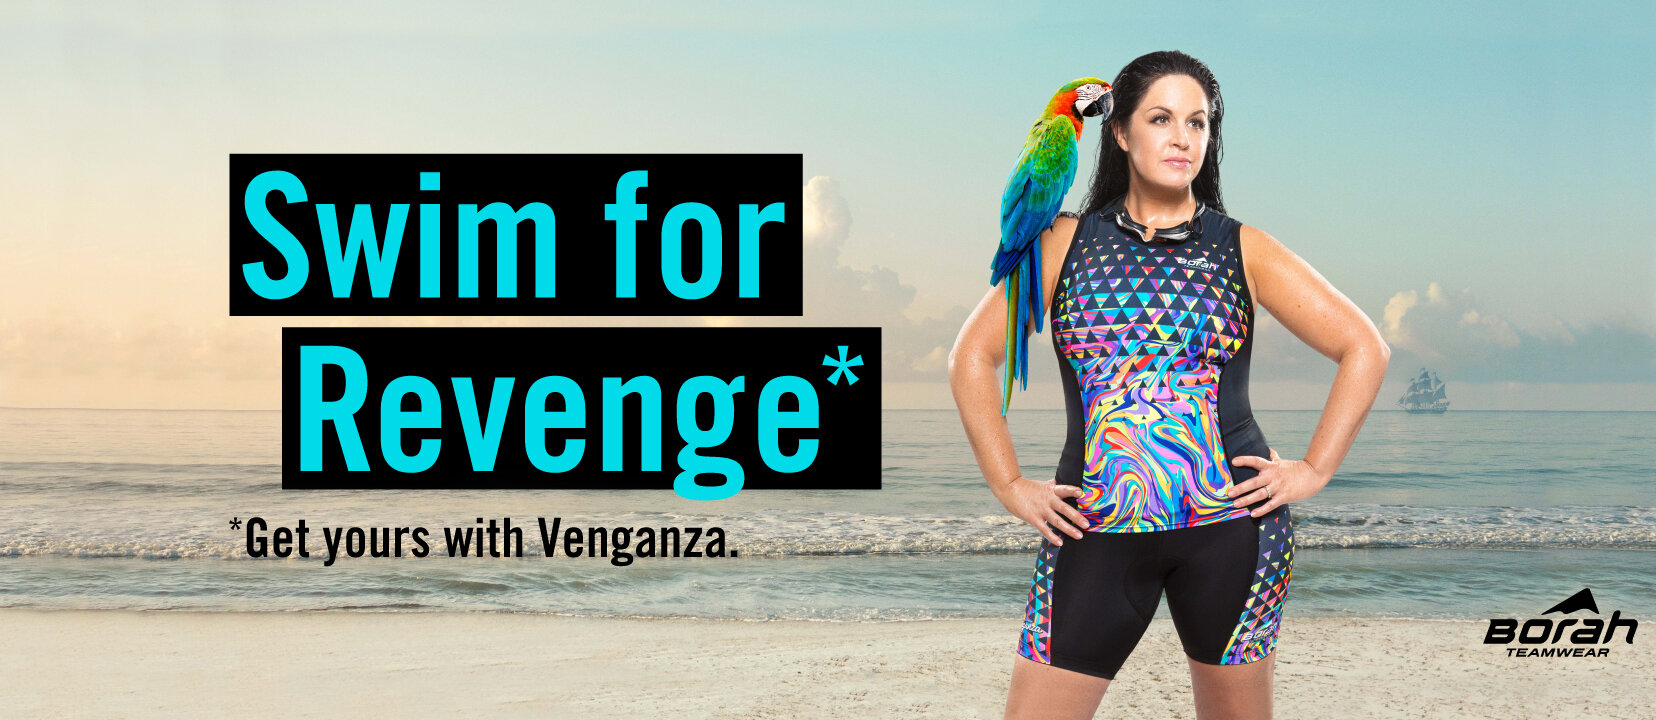 Creative product photography: female athlete wearing colorful triathlon kit by Venganza stands wet on beach with a parrot on her shoulder.